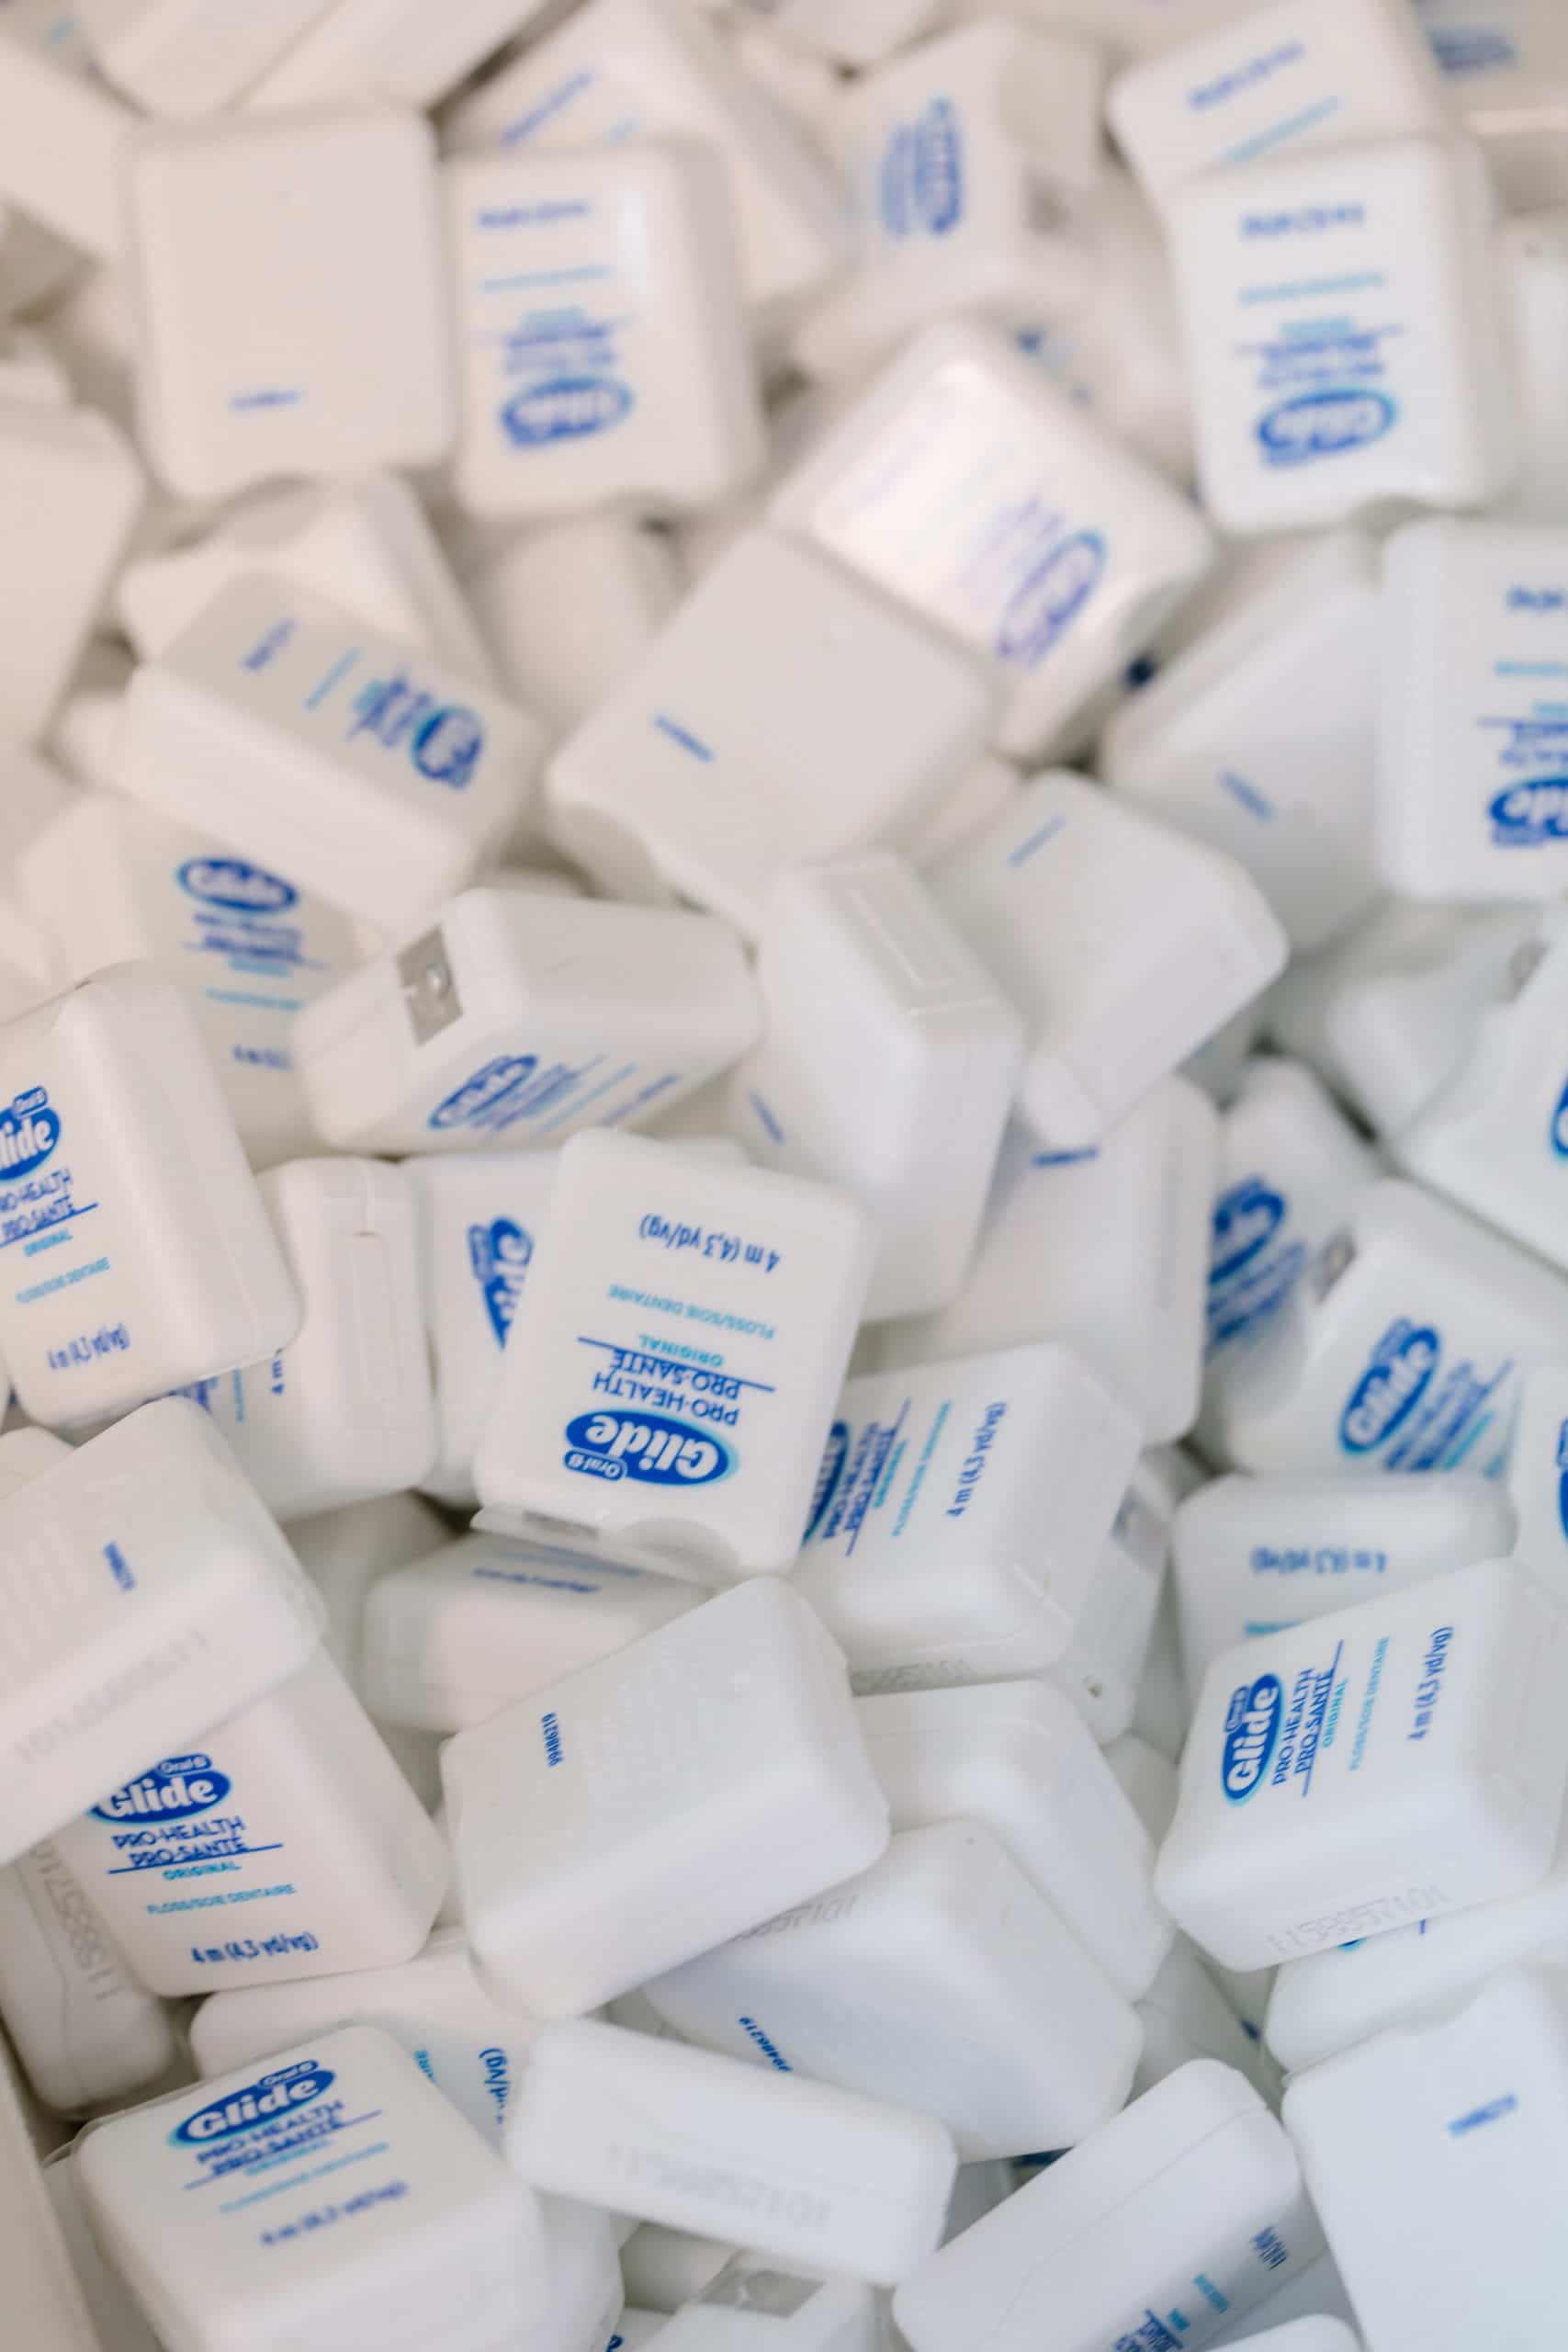 A large bin full of Oral B floss.